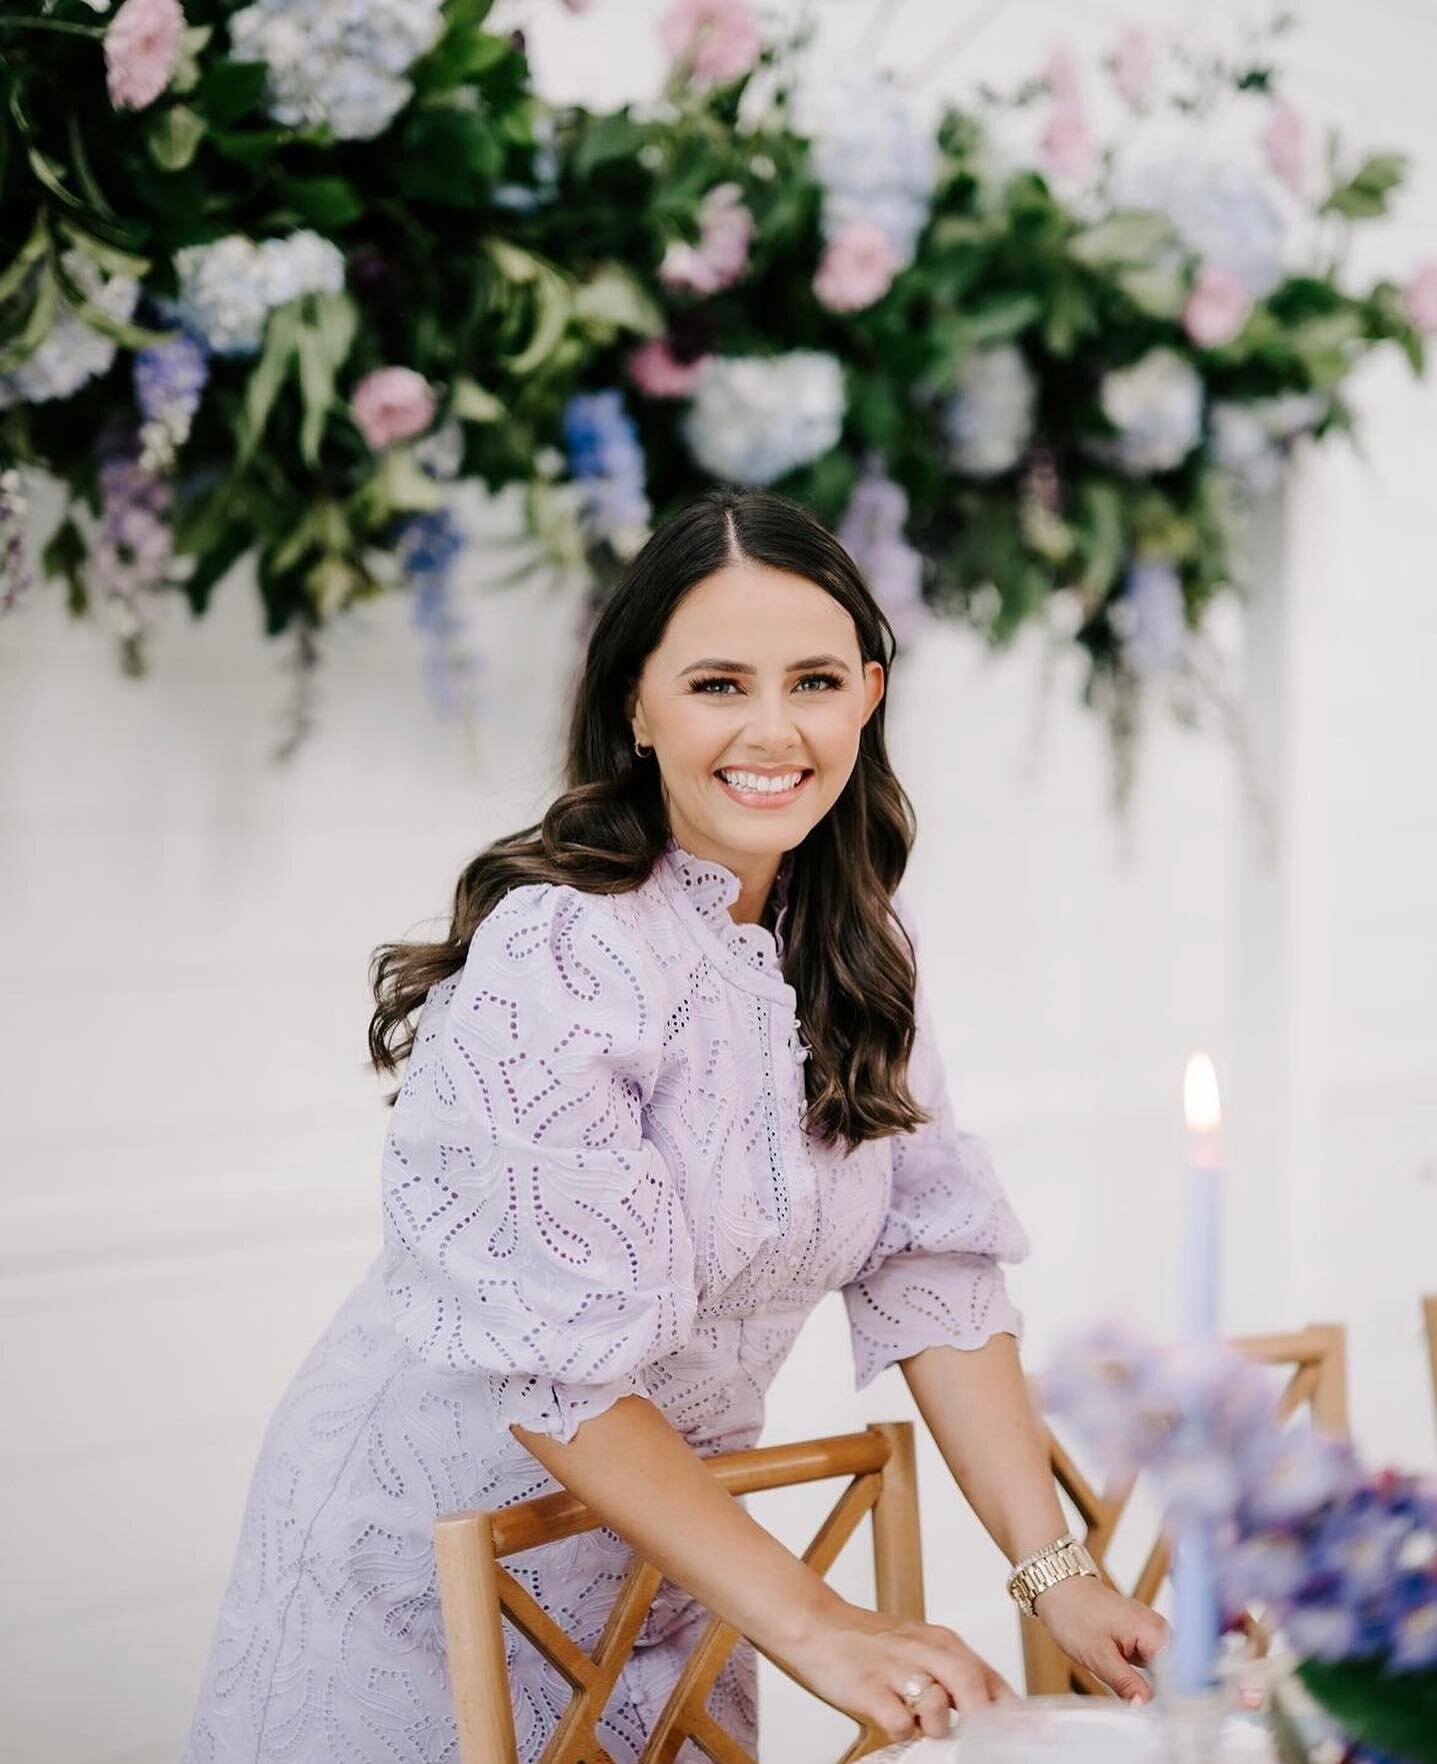 ✨ Meet our new Director of Coordination &amp; Design, Avery Daniels! ✨

Avery has been creating the most unbelievable wedding visions &amp; personable client experiences with Boxwood Manor since 2021! She can take literally any idea, bring it to life